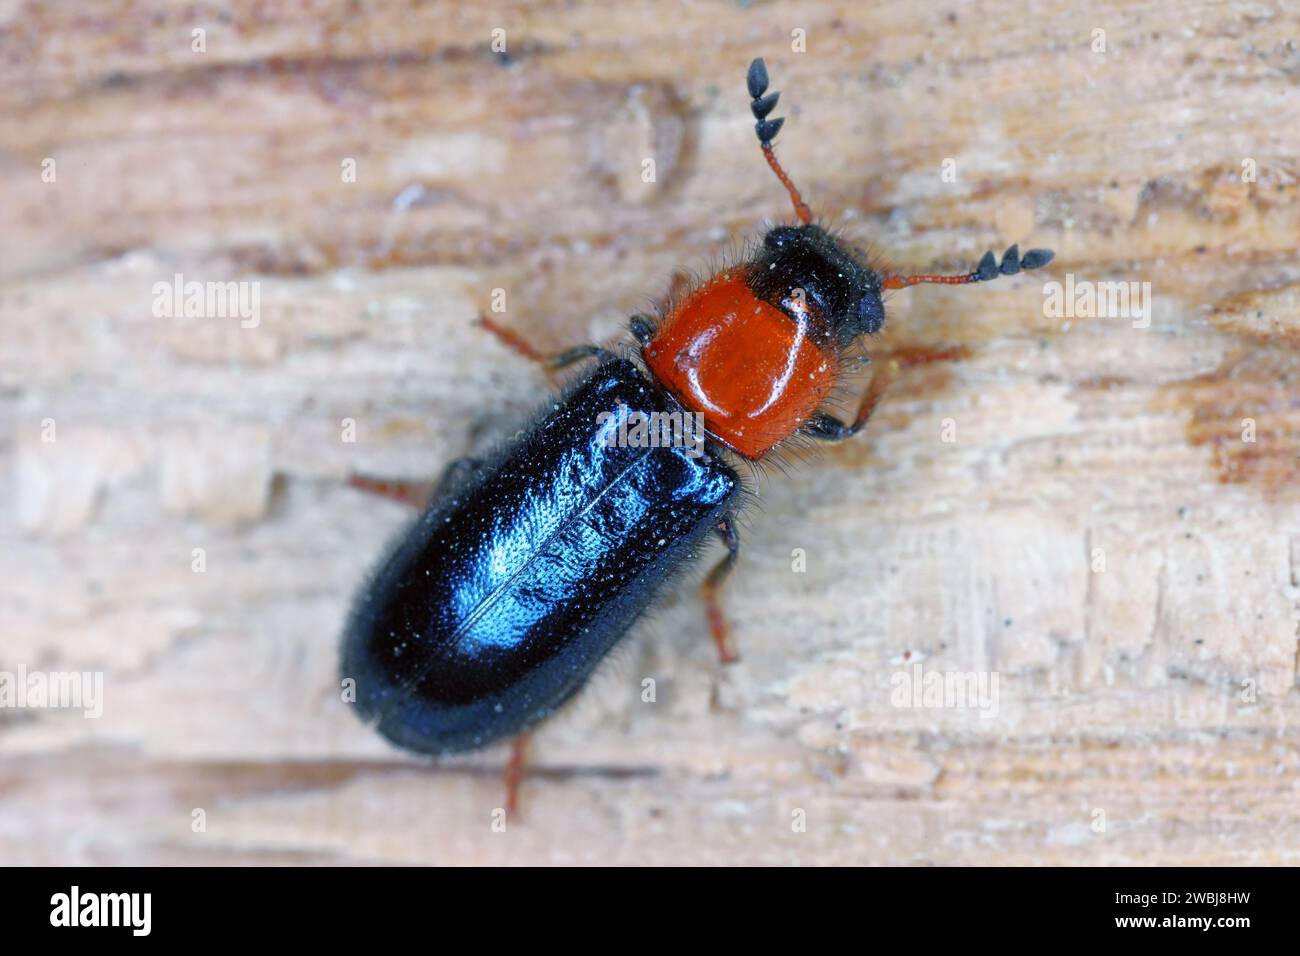 Dermestoides sanguinicollis. A very rare species of beetle in the family Cleridae. Predator found in natural forests. Stock Photo